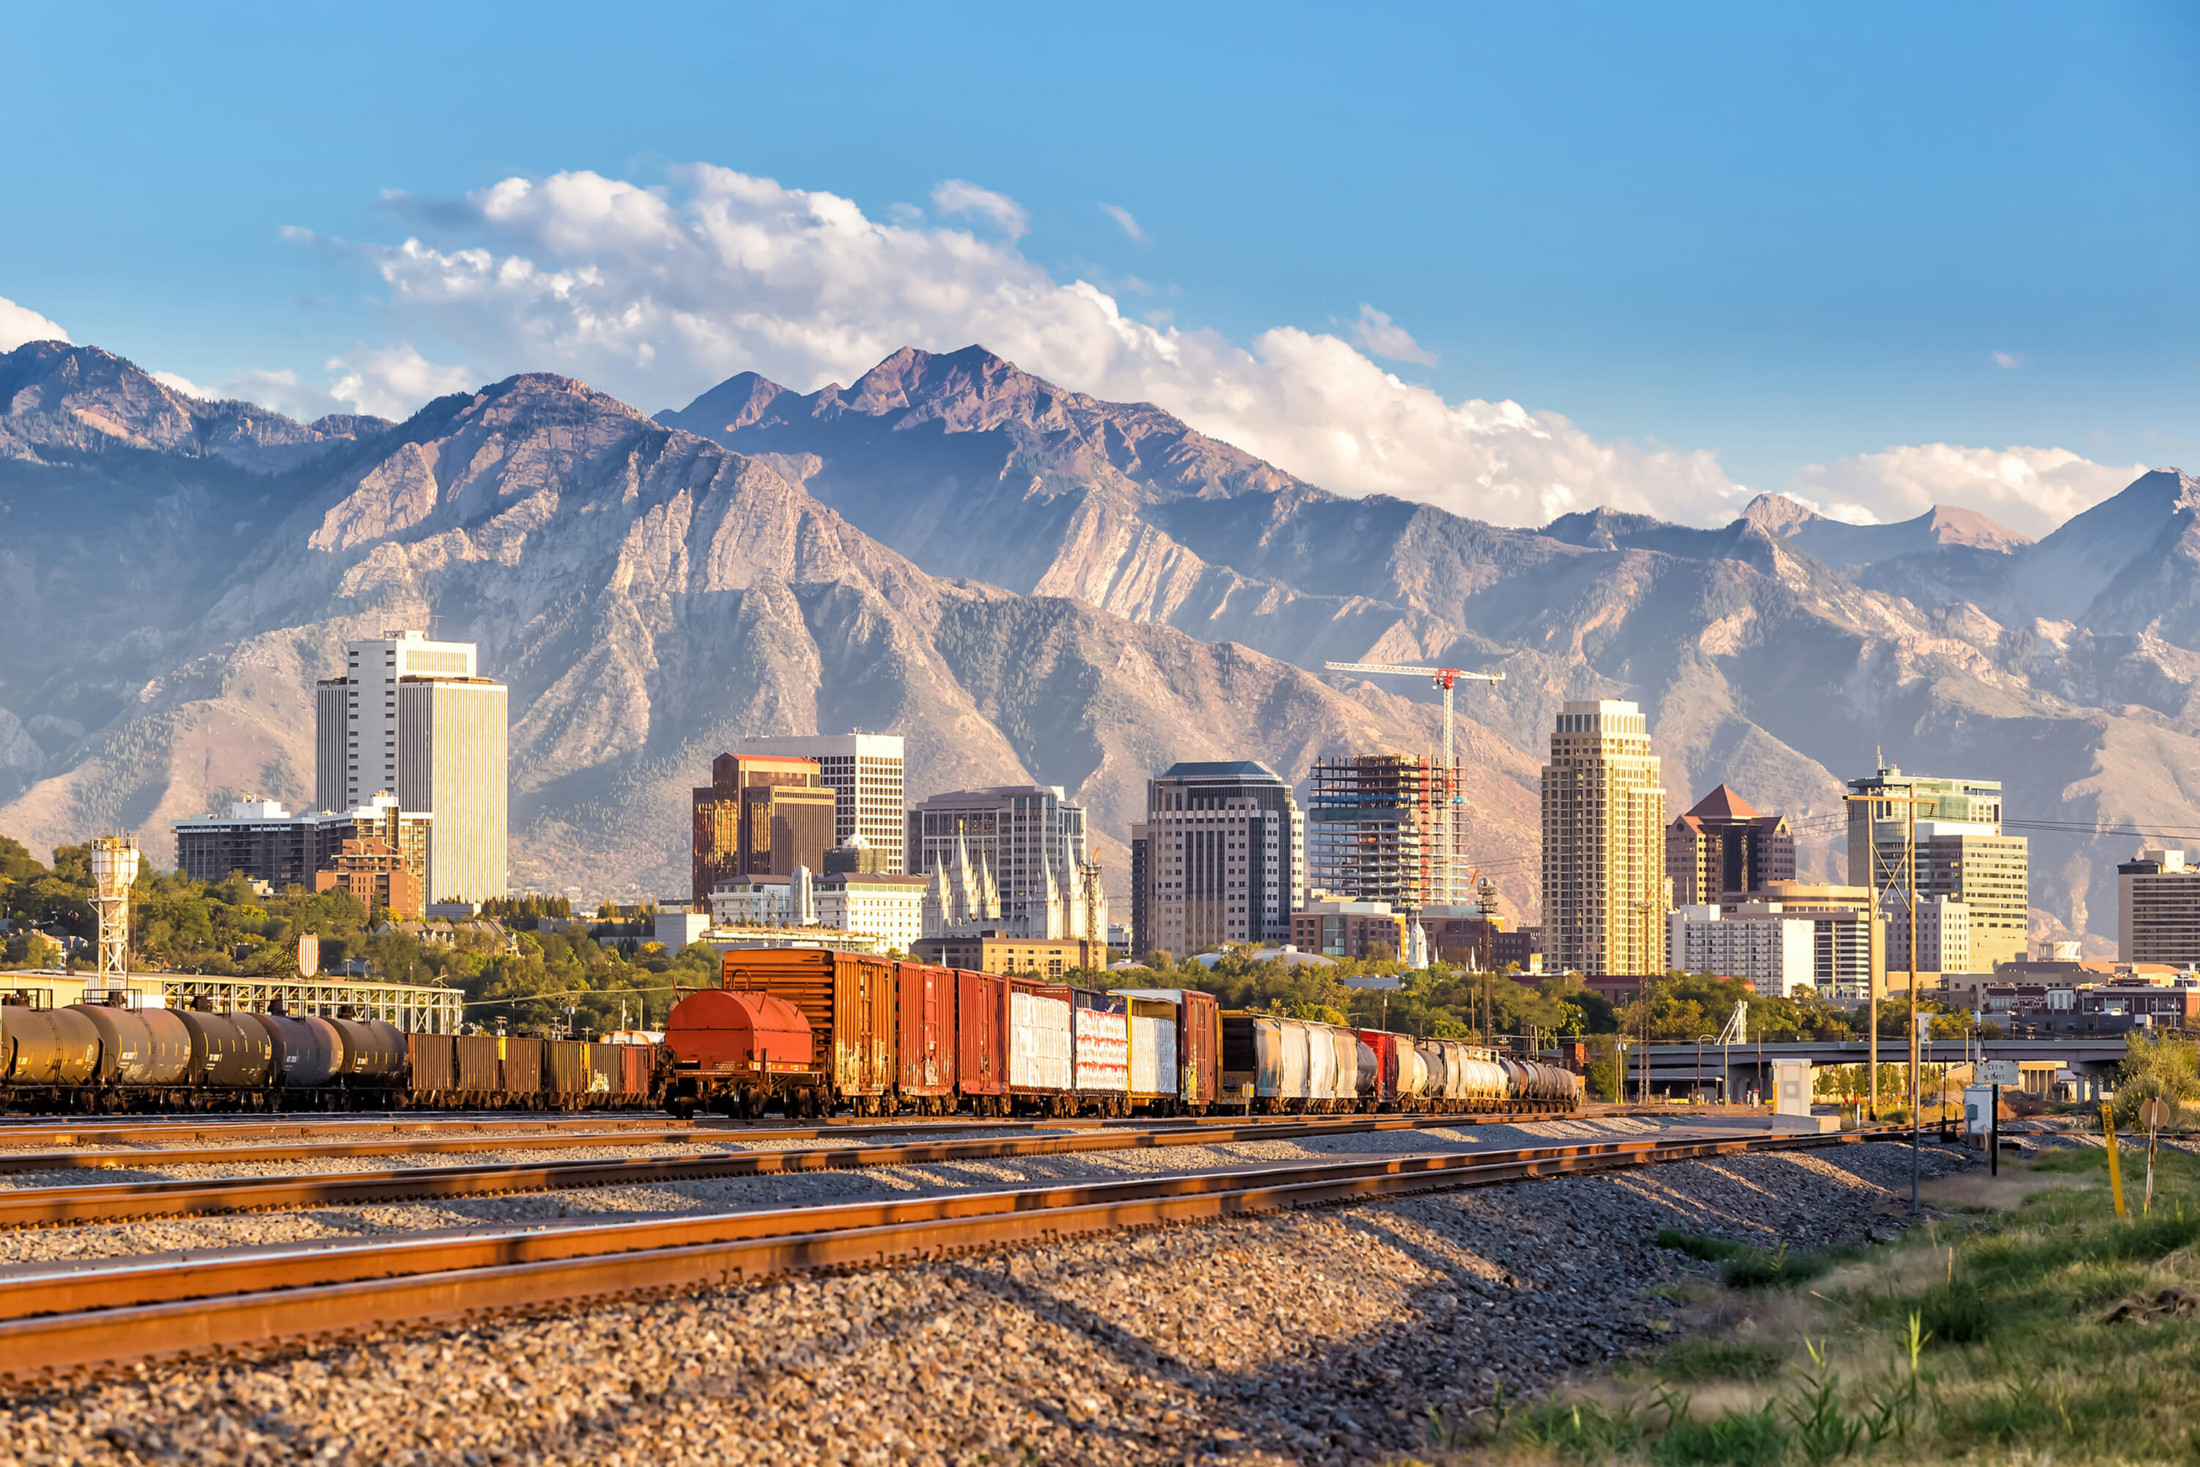 Salt Lake City, Utah | 50 Up-and-Coming Real Estate Markets to Watch in 2019 | Buildium